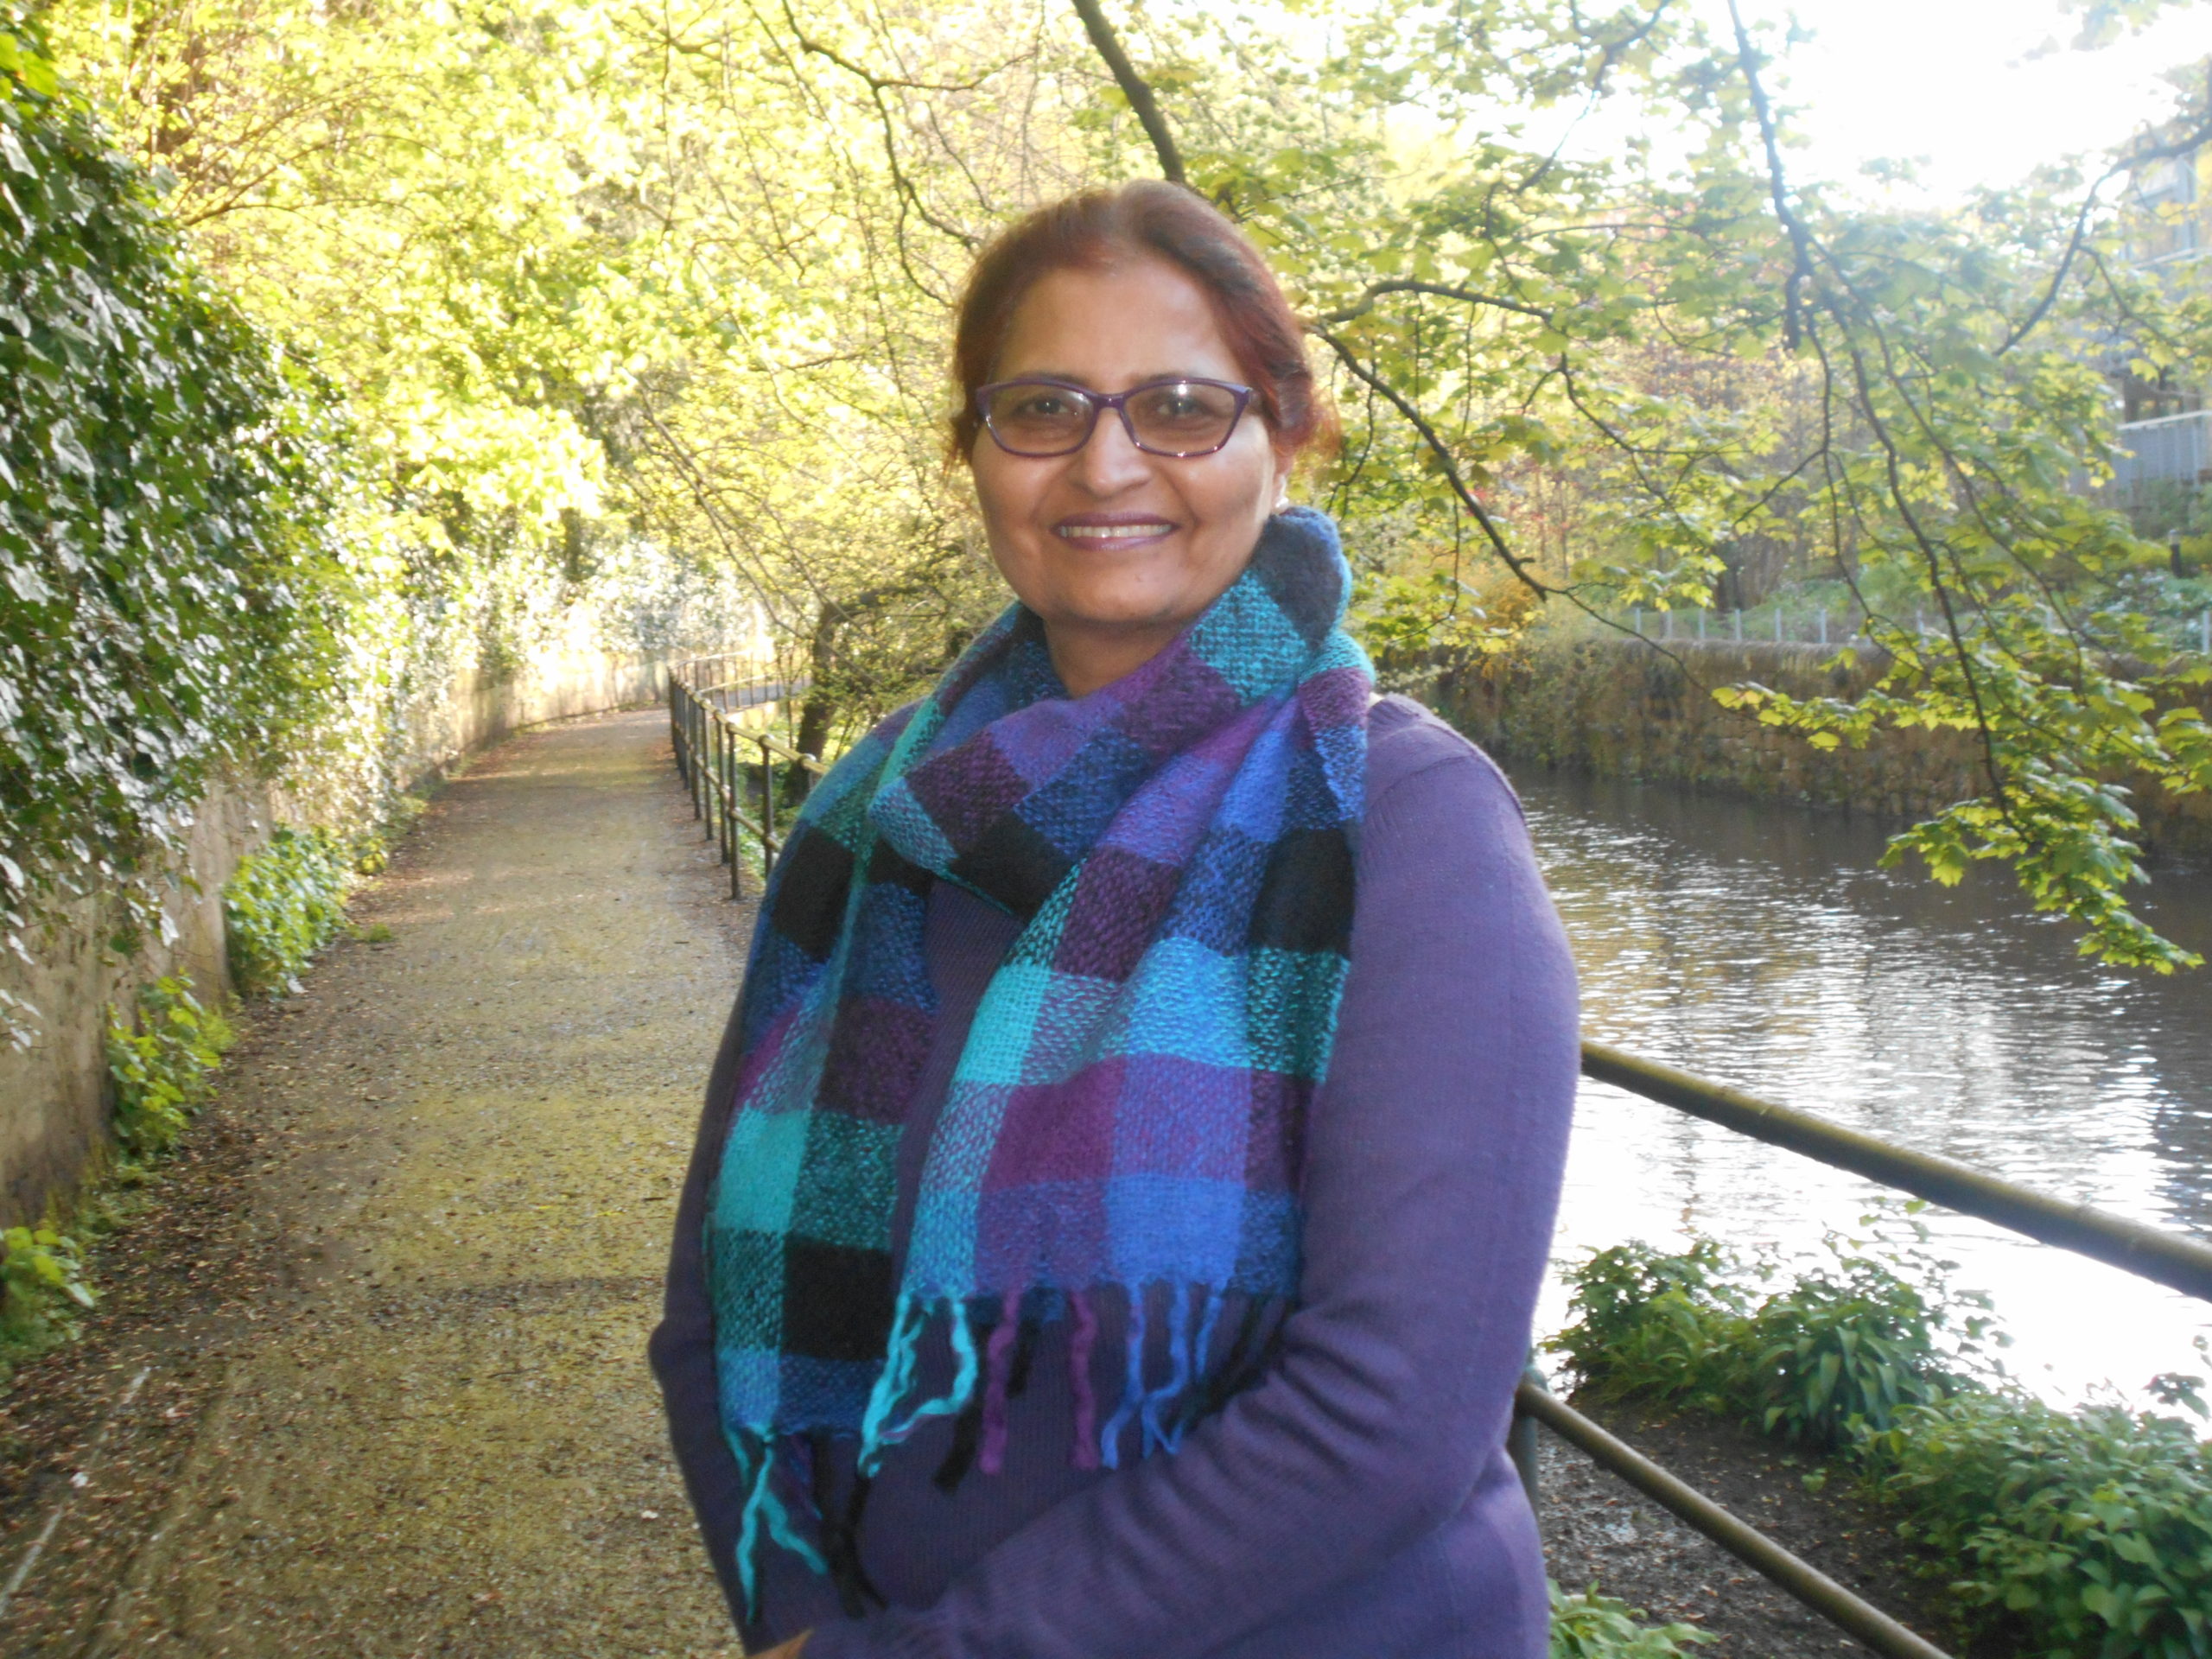 a woman smiling at the camera with a canal and foliage in the background